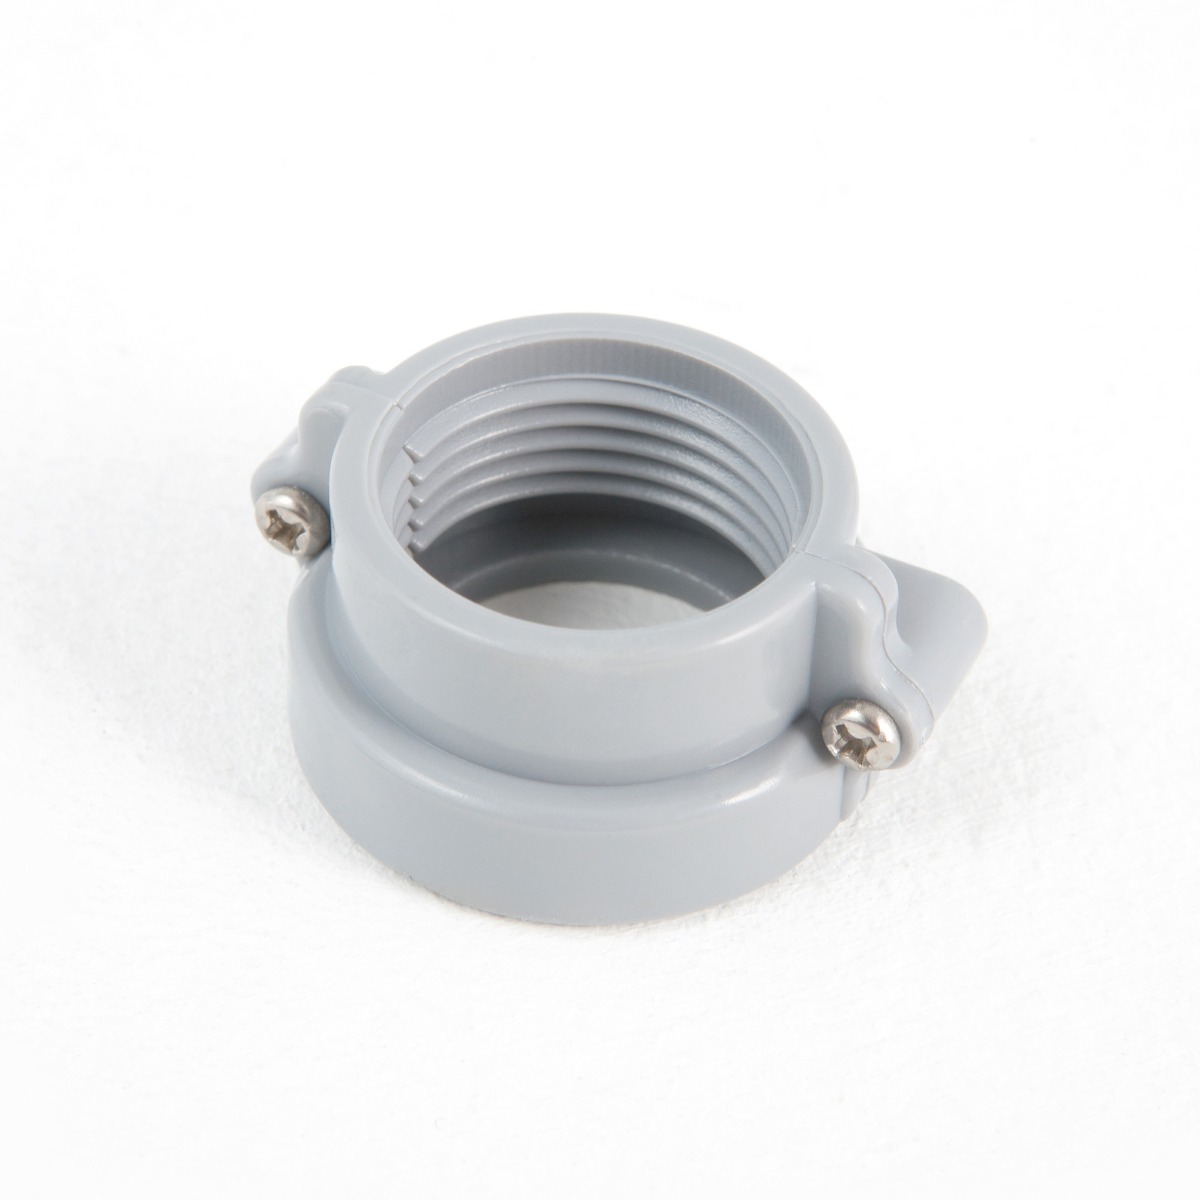 An image of Spa Pump Water Inlet/Outlet Nuts (B/C Coupling) | Small Parts | Lay-Z-Spa